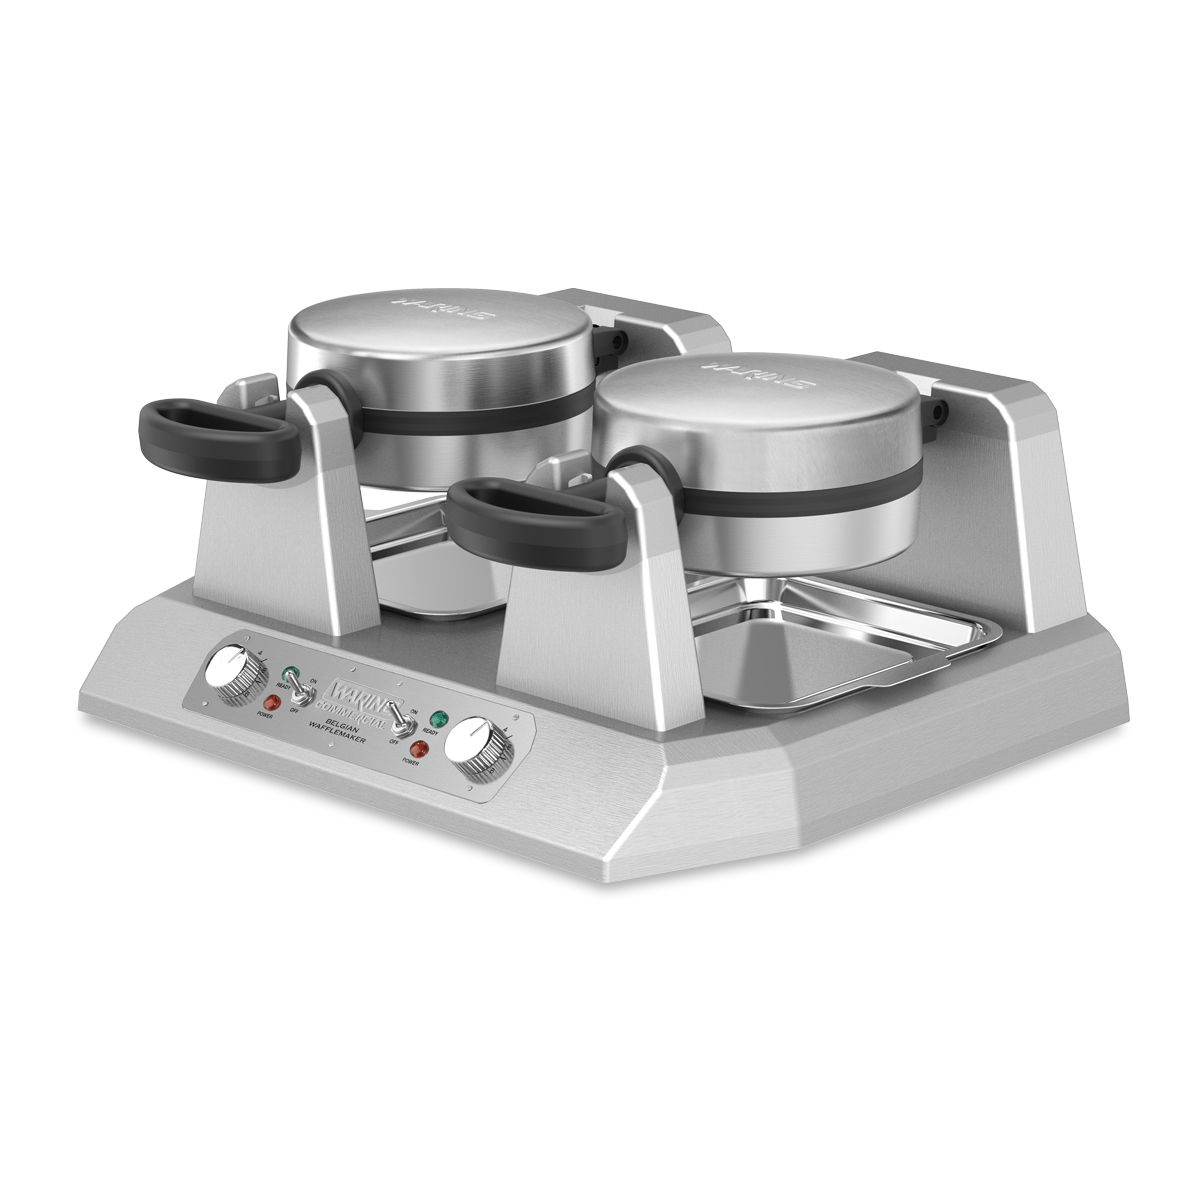 https://www.waringcommercialproducts.com/files/products/ww250x-waring-side-by-side-belgian-waffle-maker-main.jpg